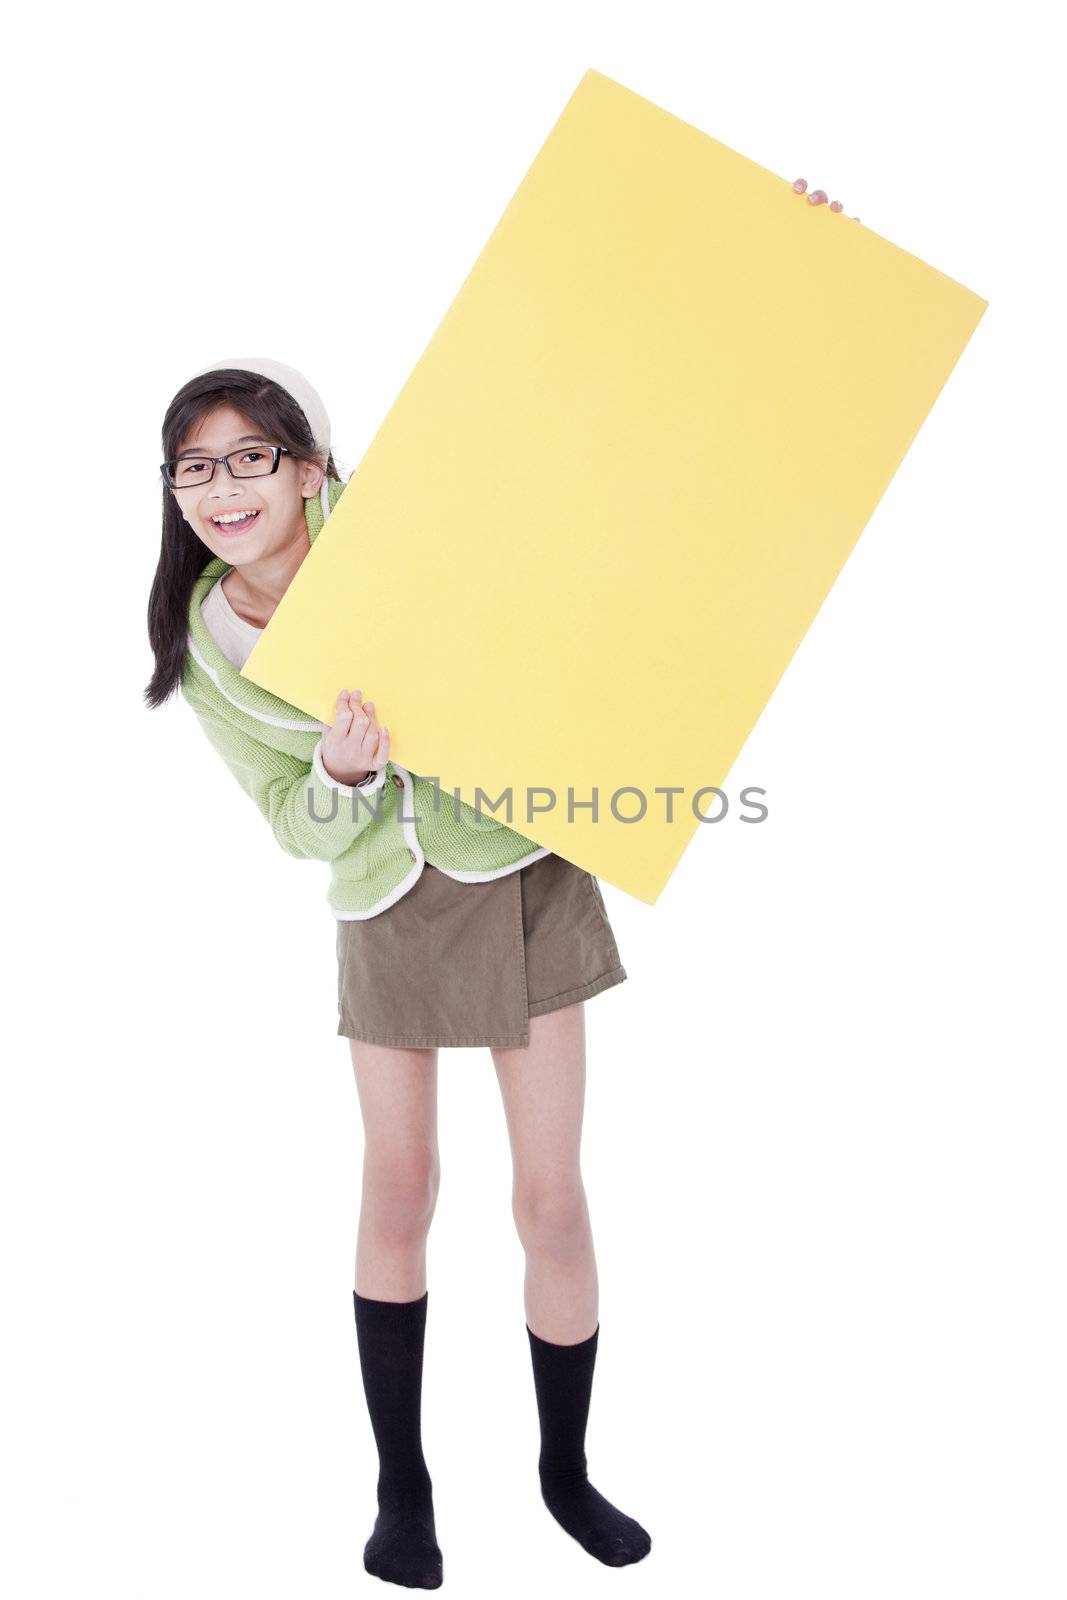 Girl in green sweater holding blank yellow sign by jarenwicklund